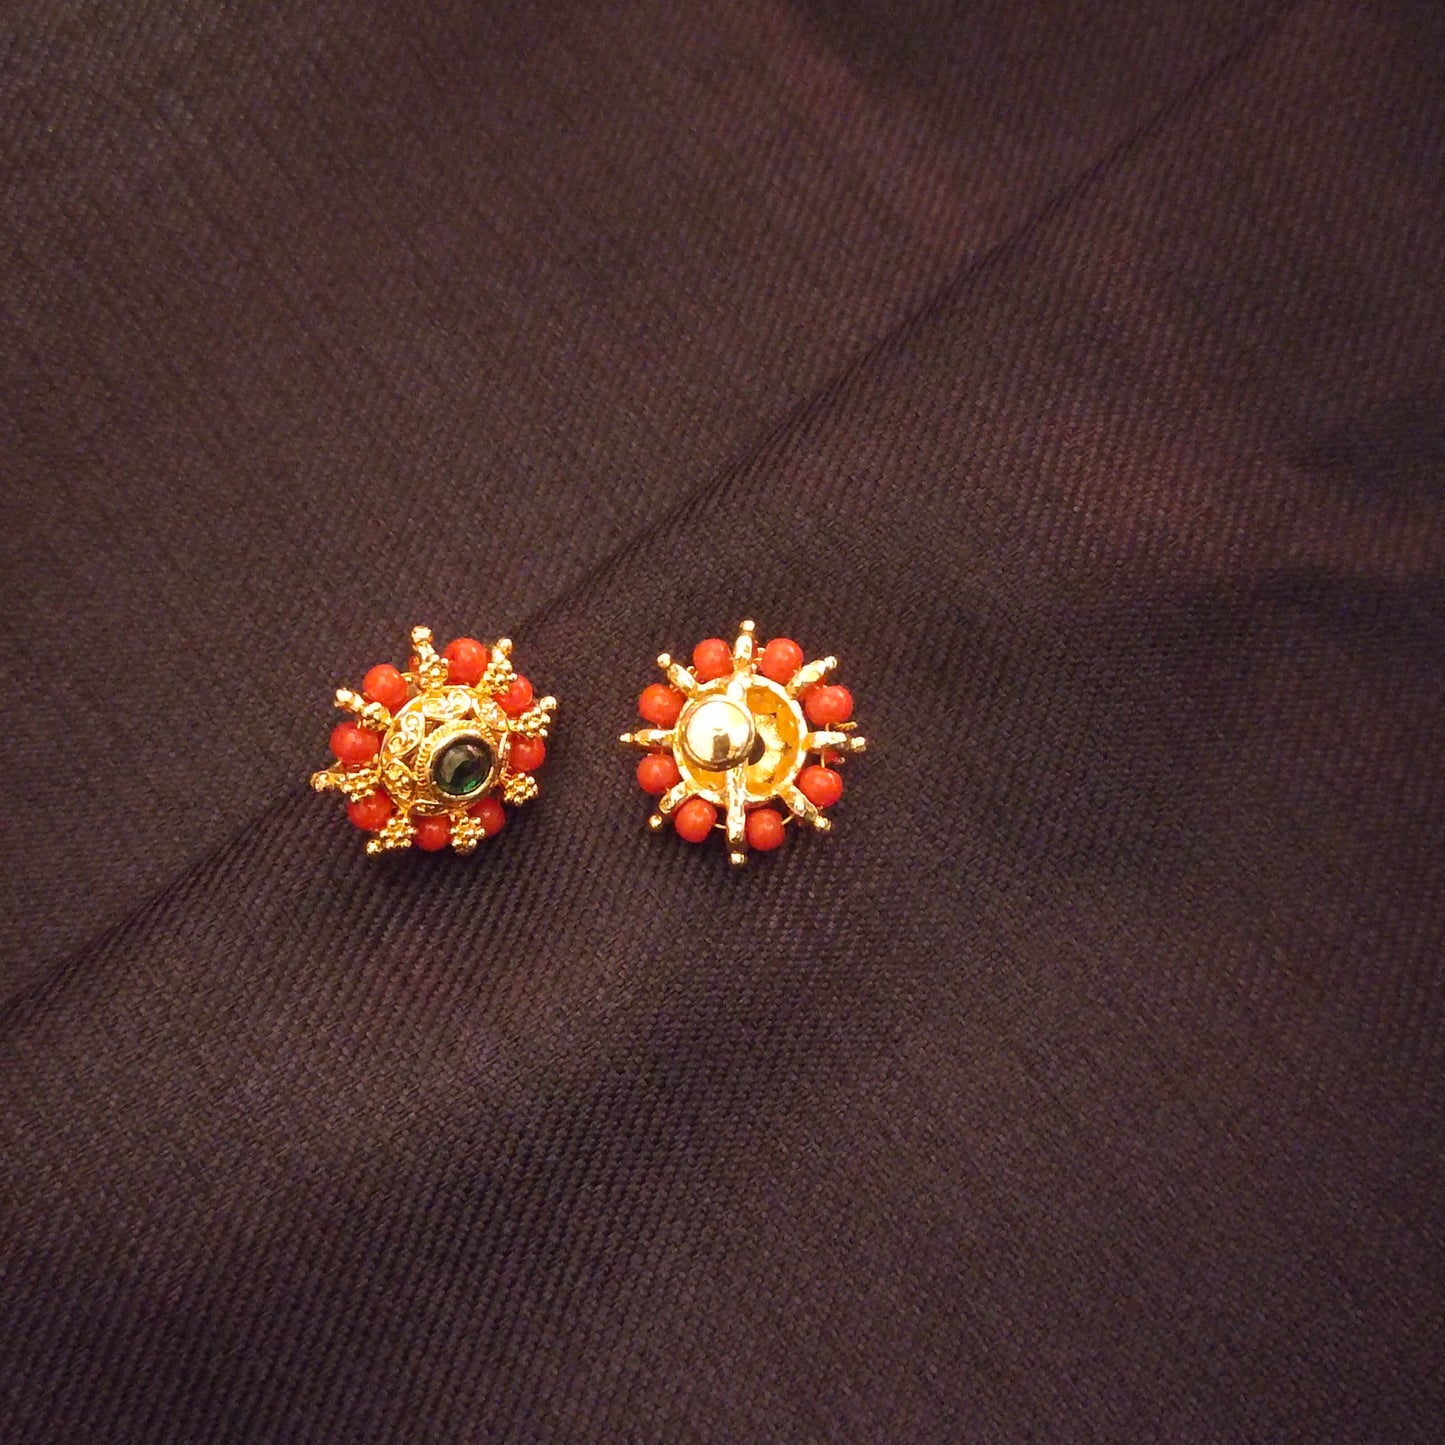 "Glamour in Simplicity: Enhance Your Style with Asp Fashion Jewellery's Small Coral Studs Earrings"